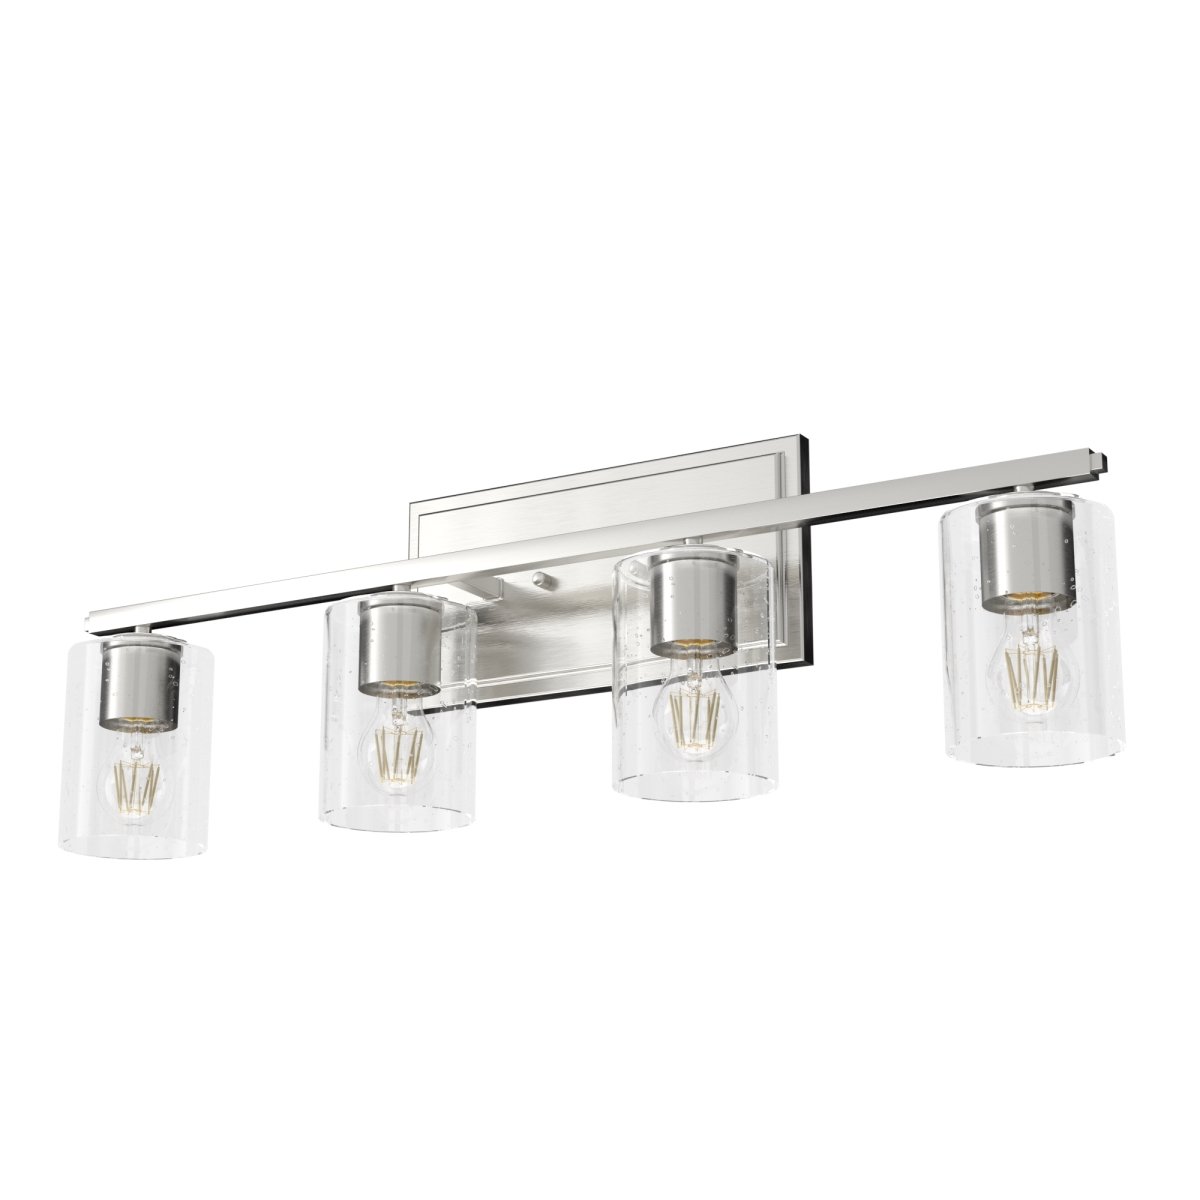 Picture of Hunter 48032 9.5 in. Kerrison Brushed Nickel with Seeded Glass 4 Light Bathroom Vanity Wall Light Fixture